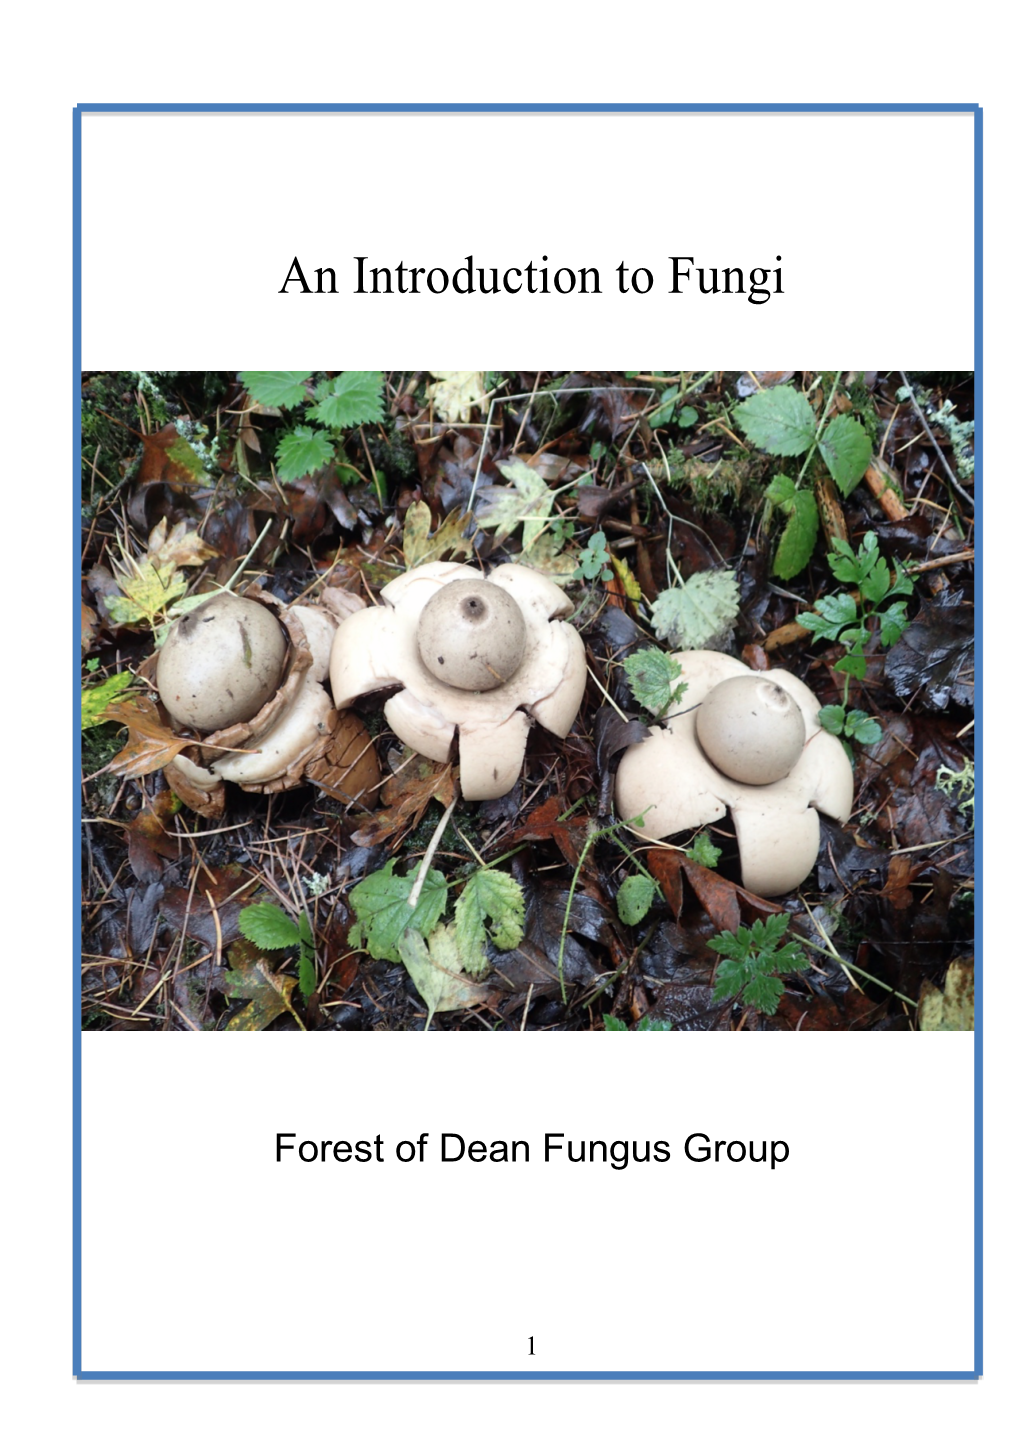 Introduction to Dean Fungi